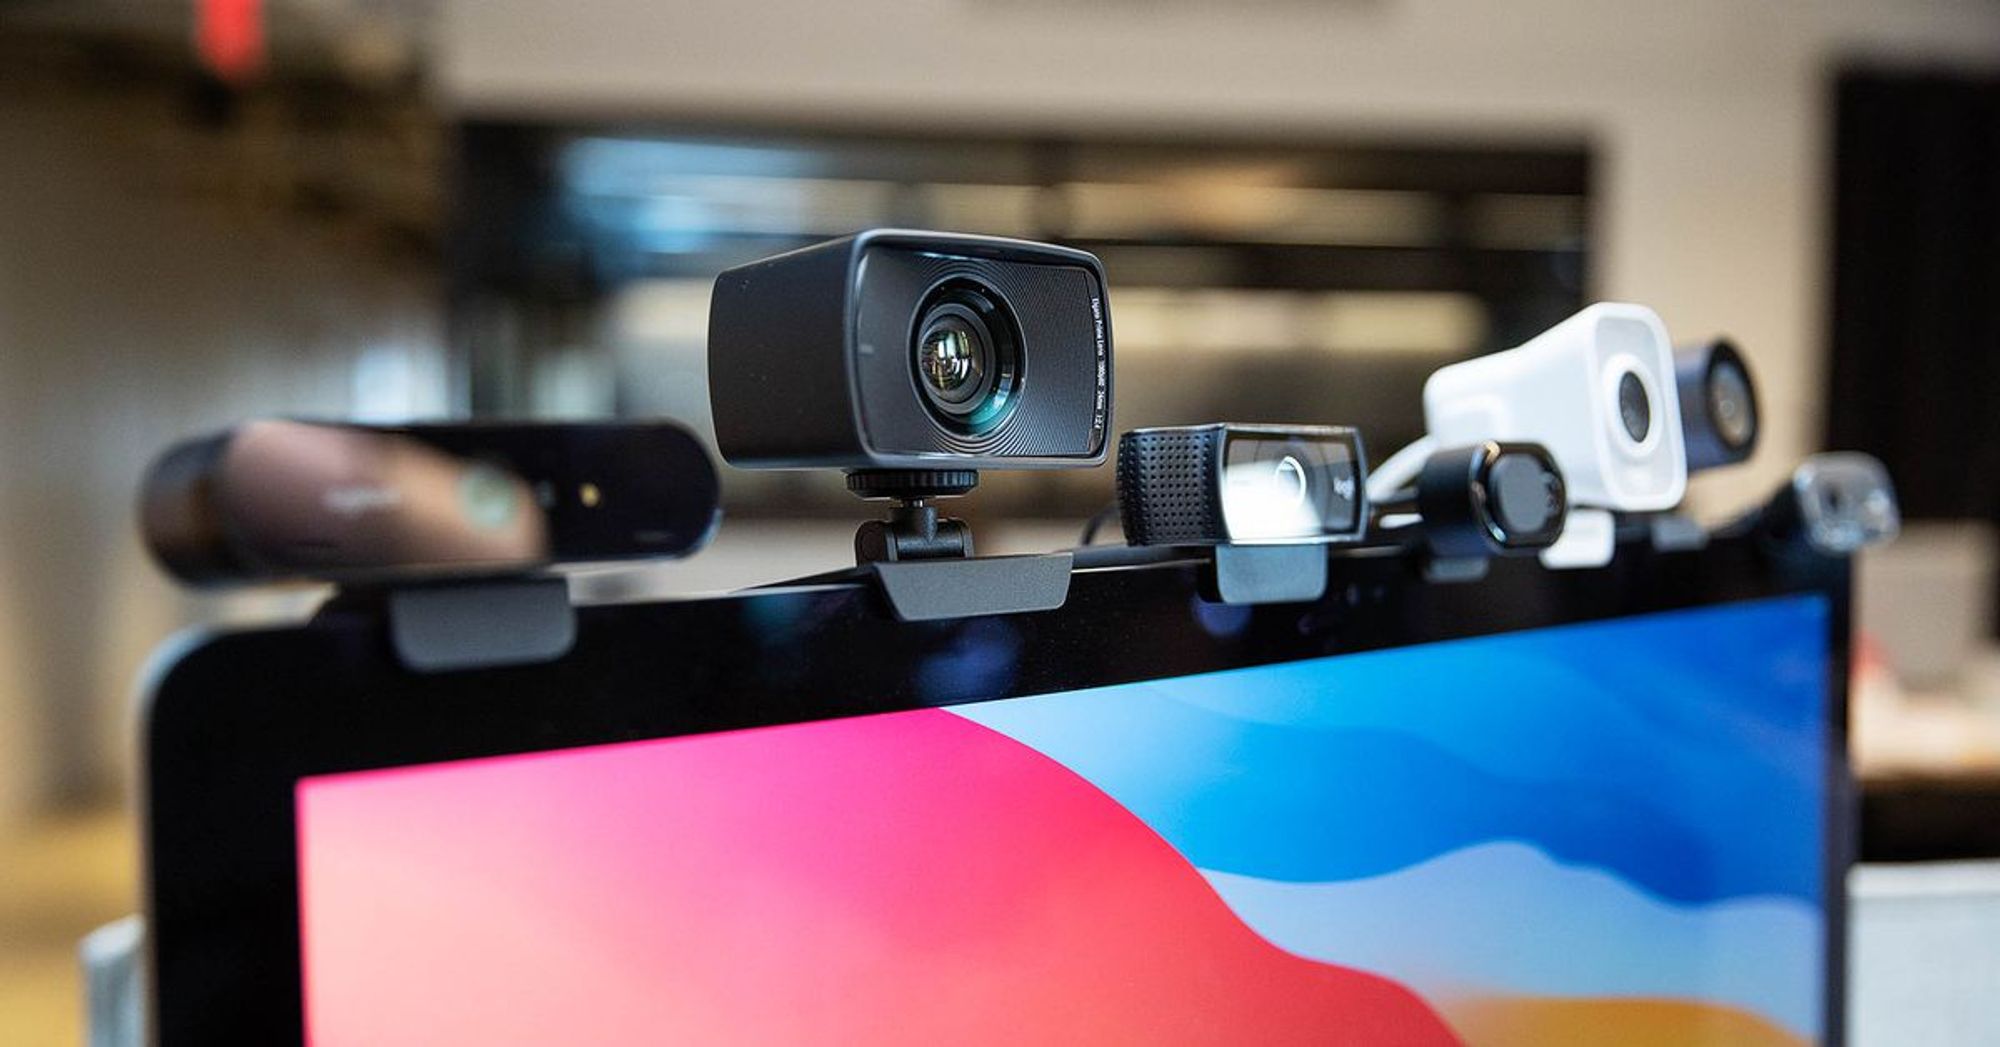 The best webcam to buy right now